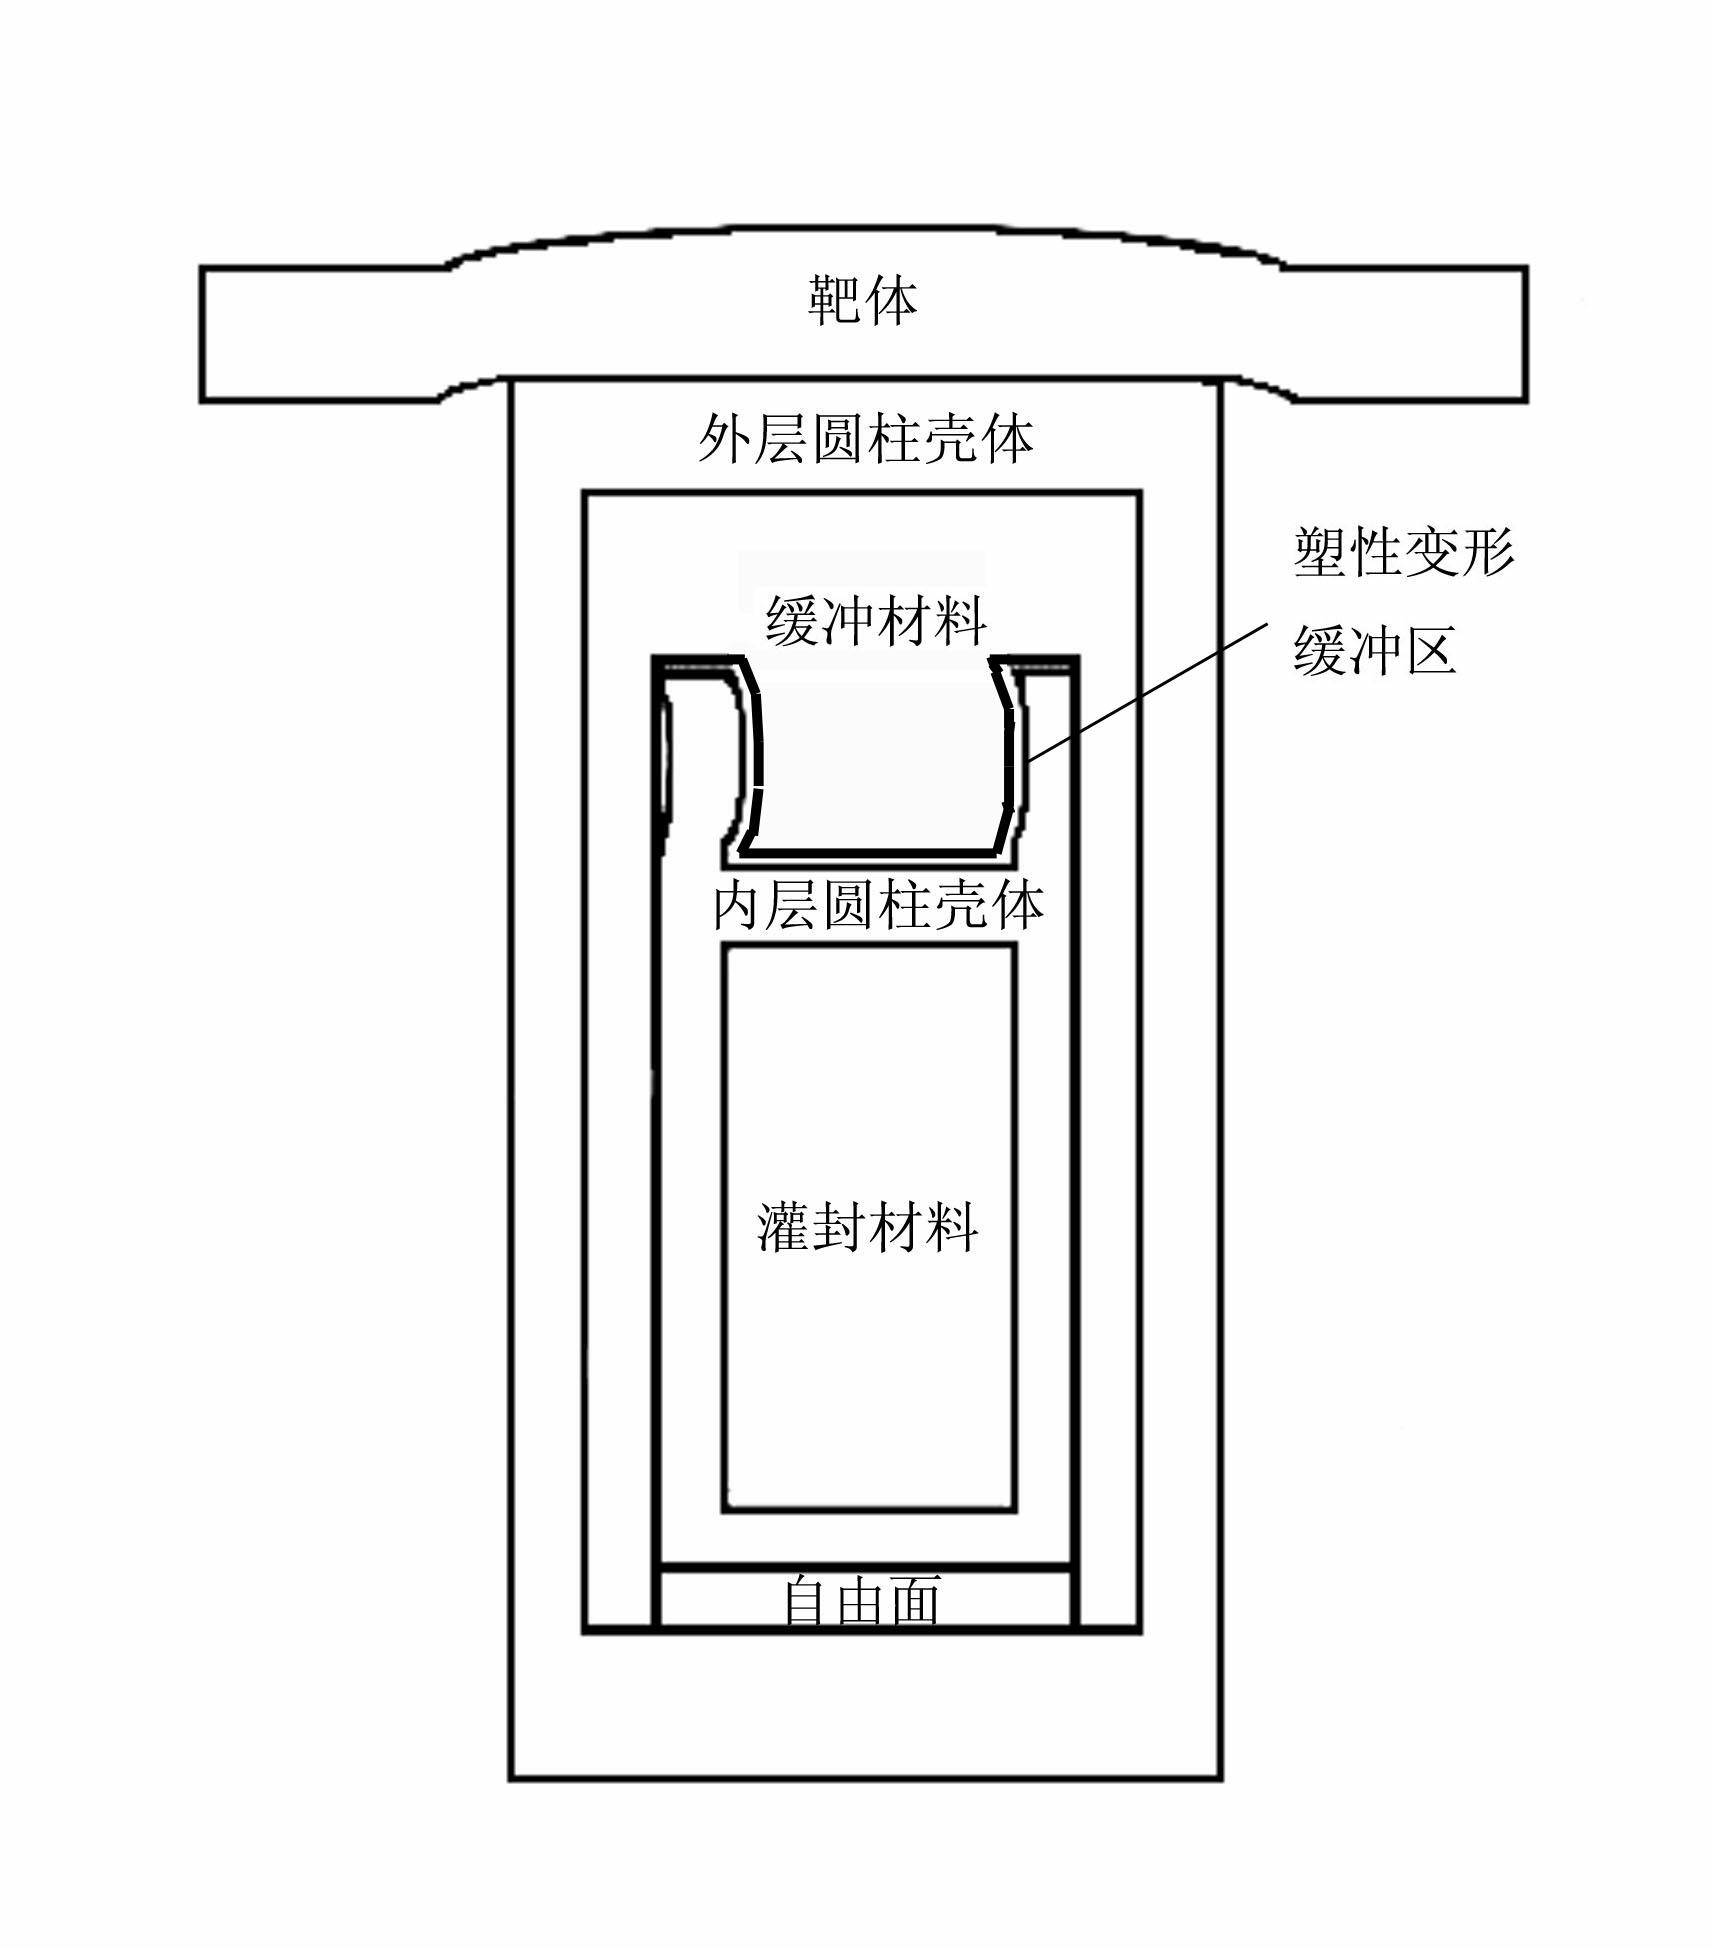 Structural Design Method for Shock-resistant Protective Shell of Test Equipment